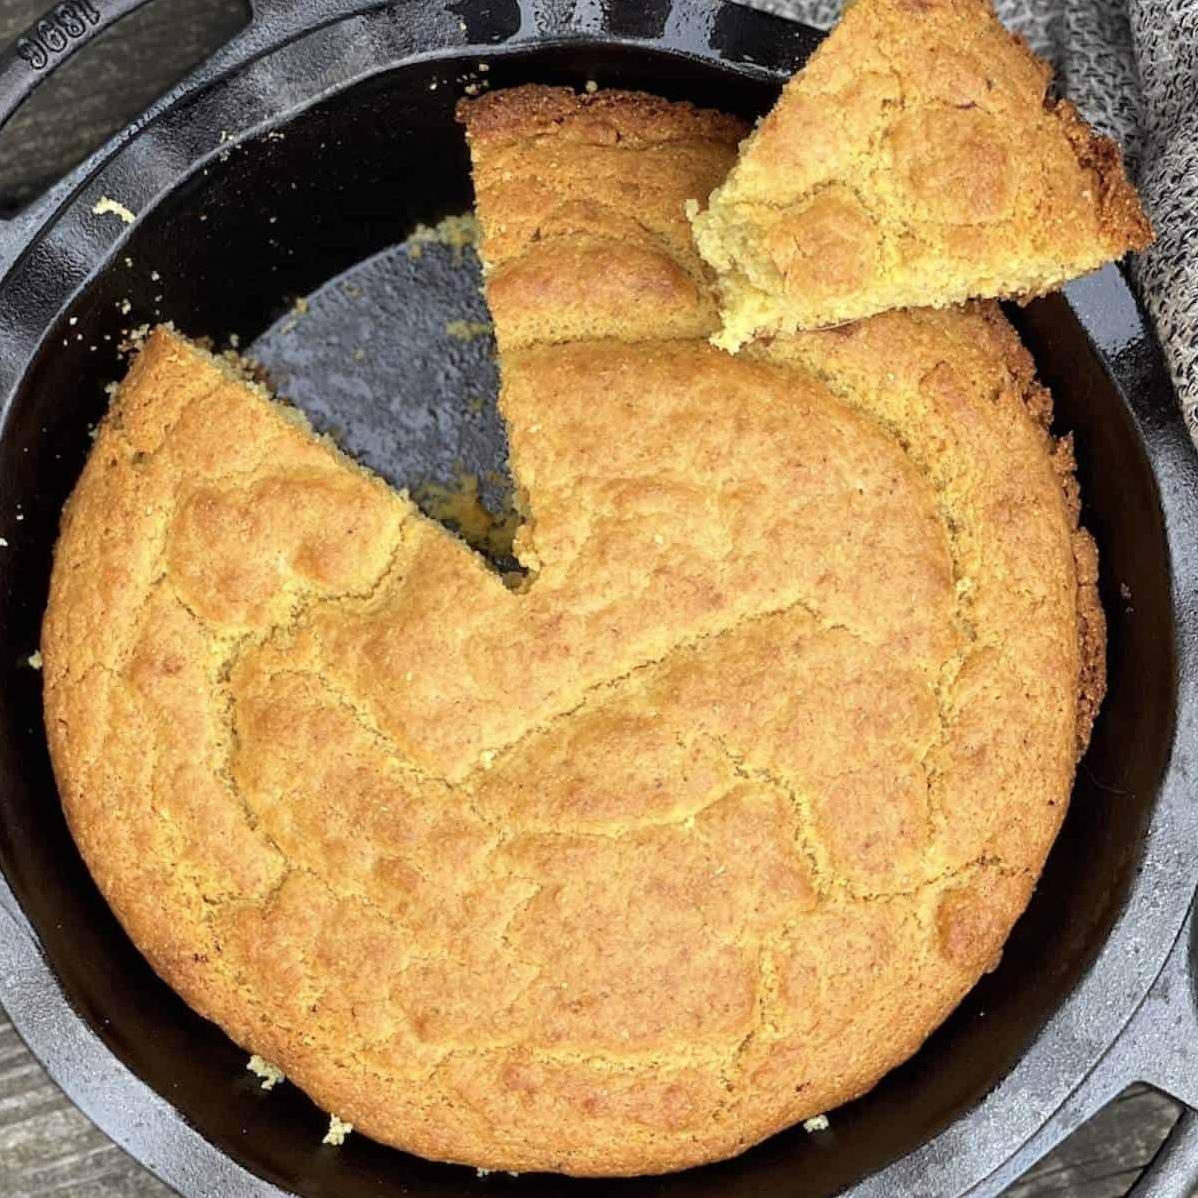  Nothing beats the aroma of fresh baked cornbread wafting through the kitchen.